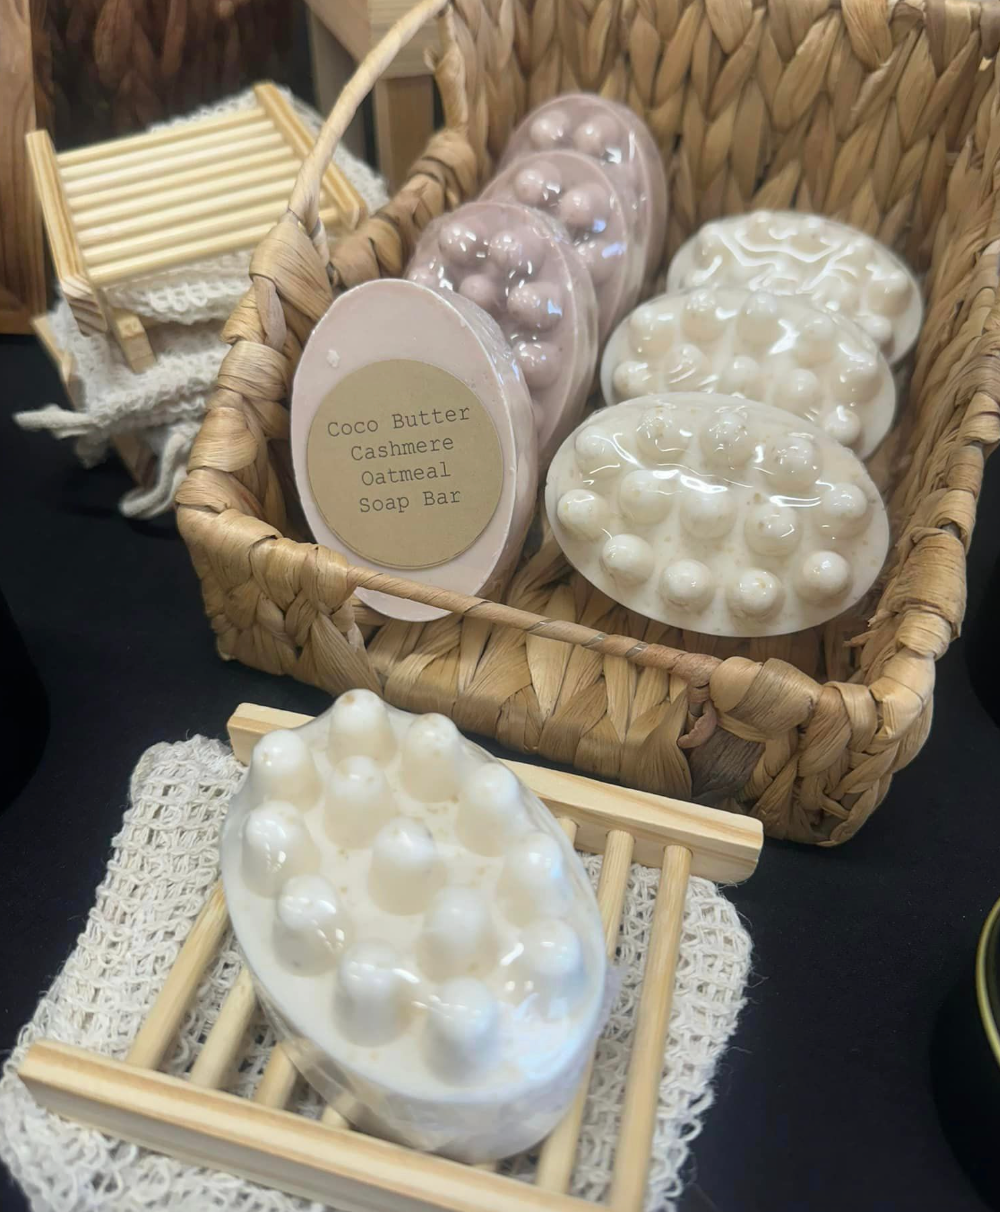 Oatmeal Soap Bars - Handmade in Michigan - Variety of Scents